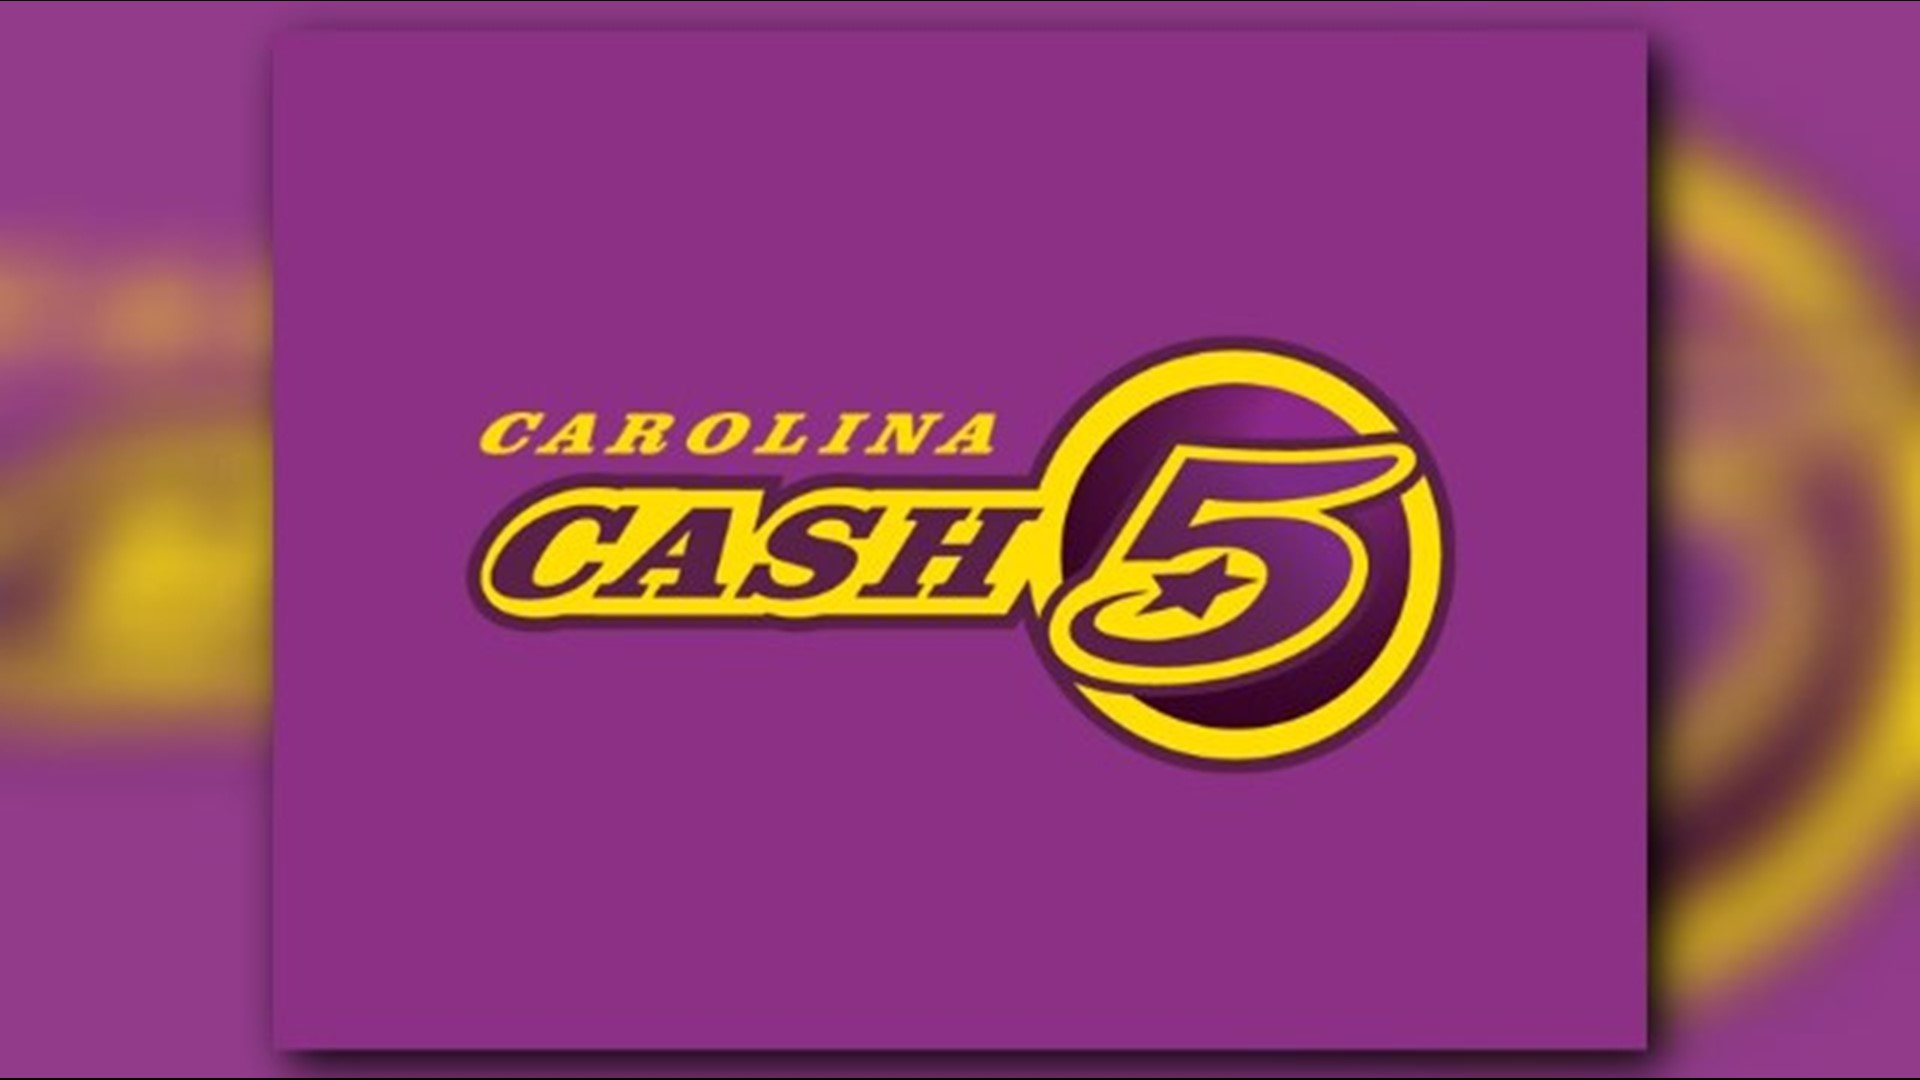 Carolina Cash 5 Gets New Makeover! Players To See Faster Growing